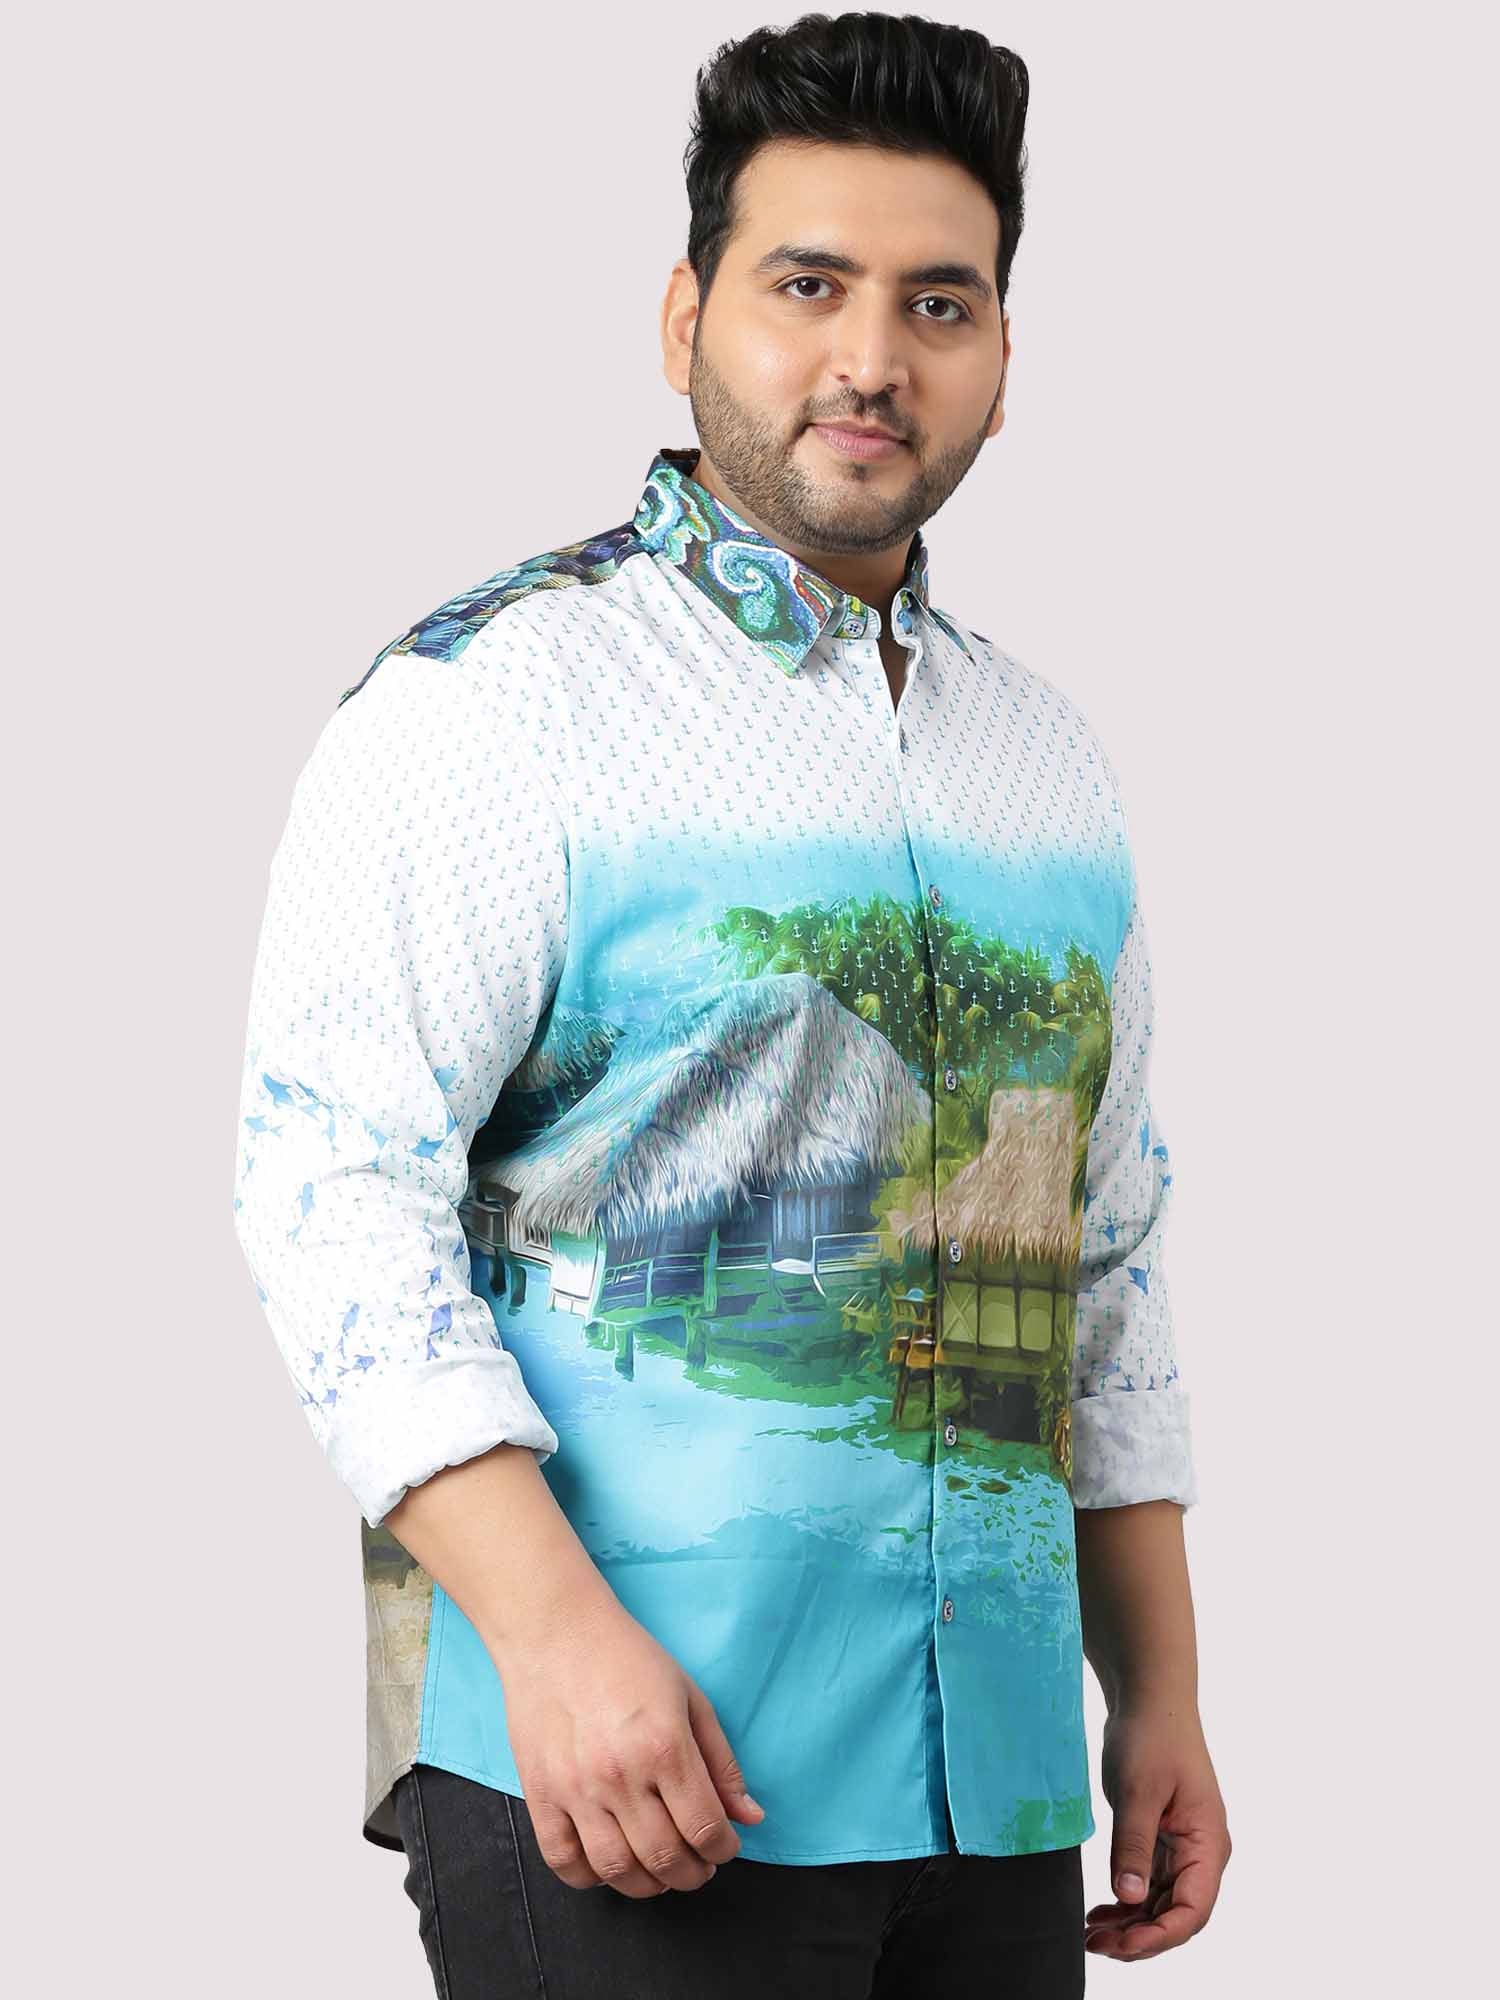 Night Out Party Wear Shirts Men's Plus Size